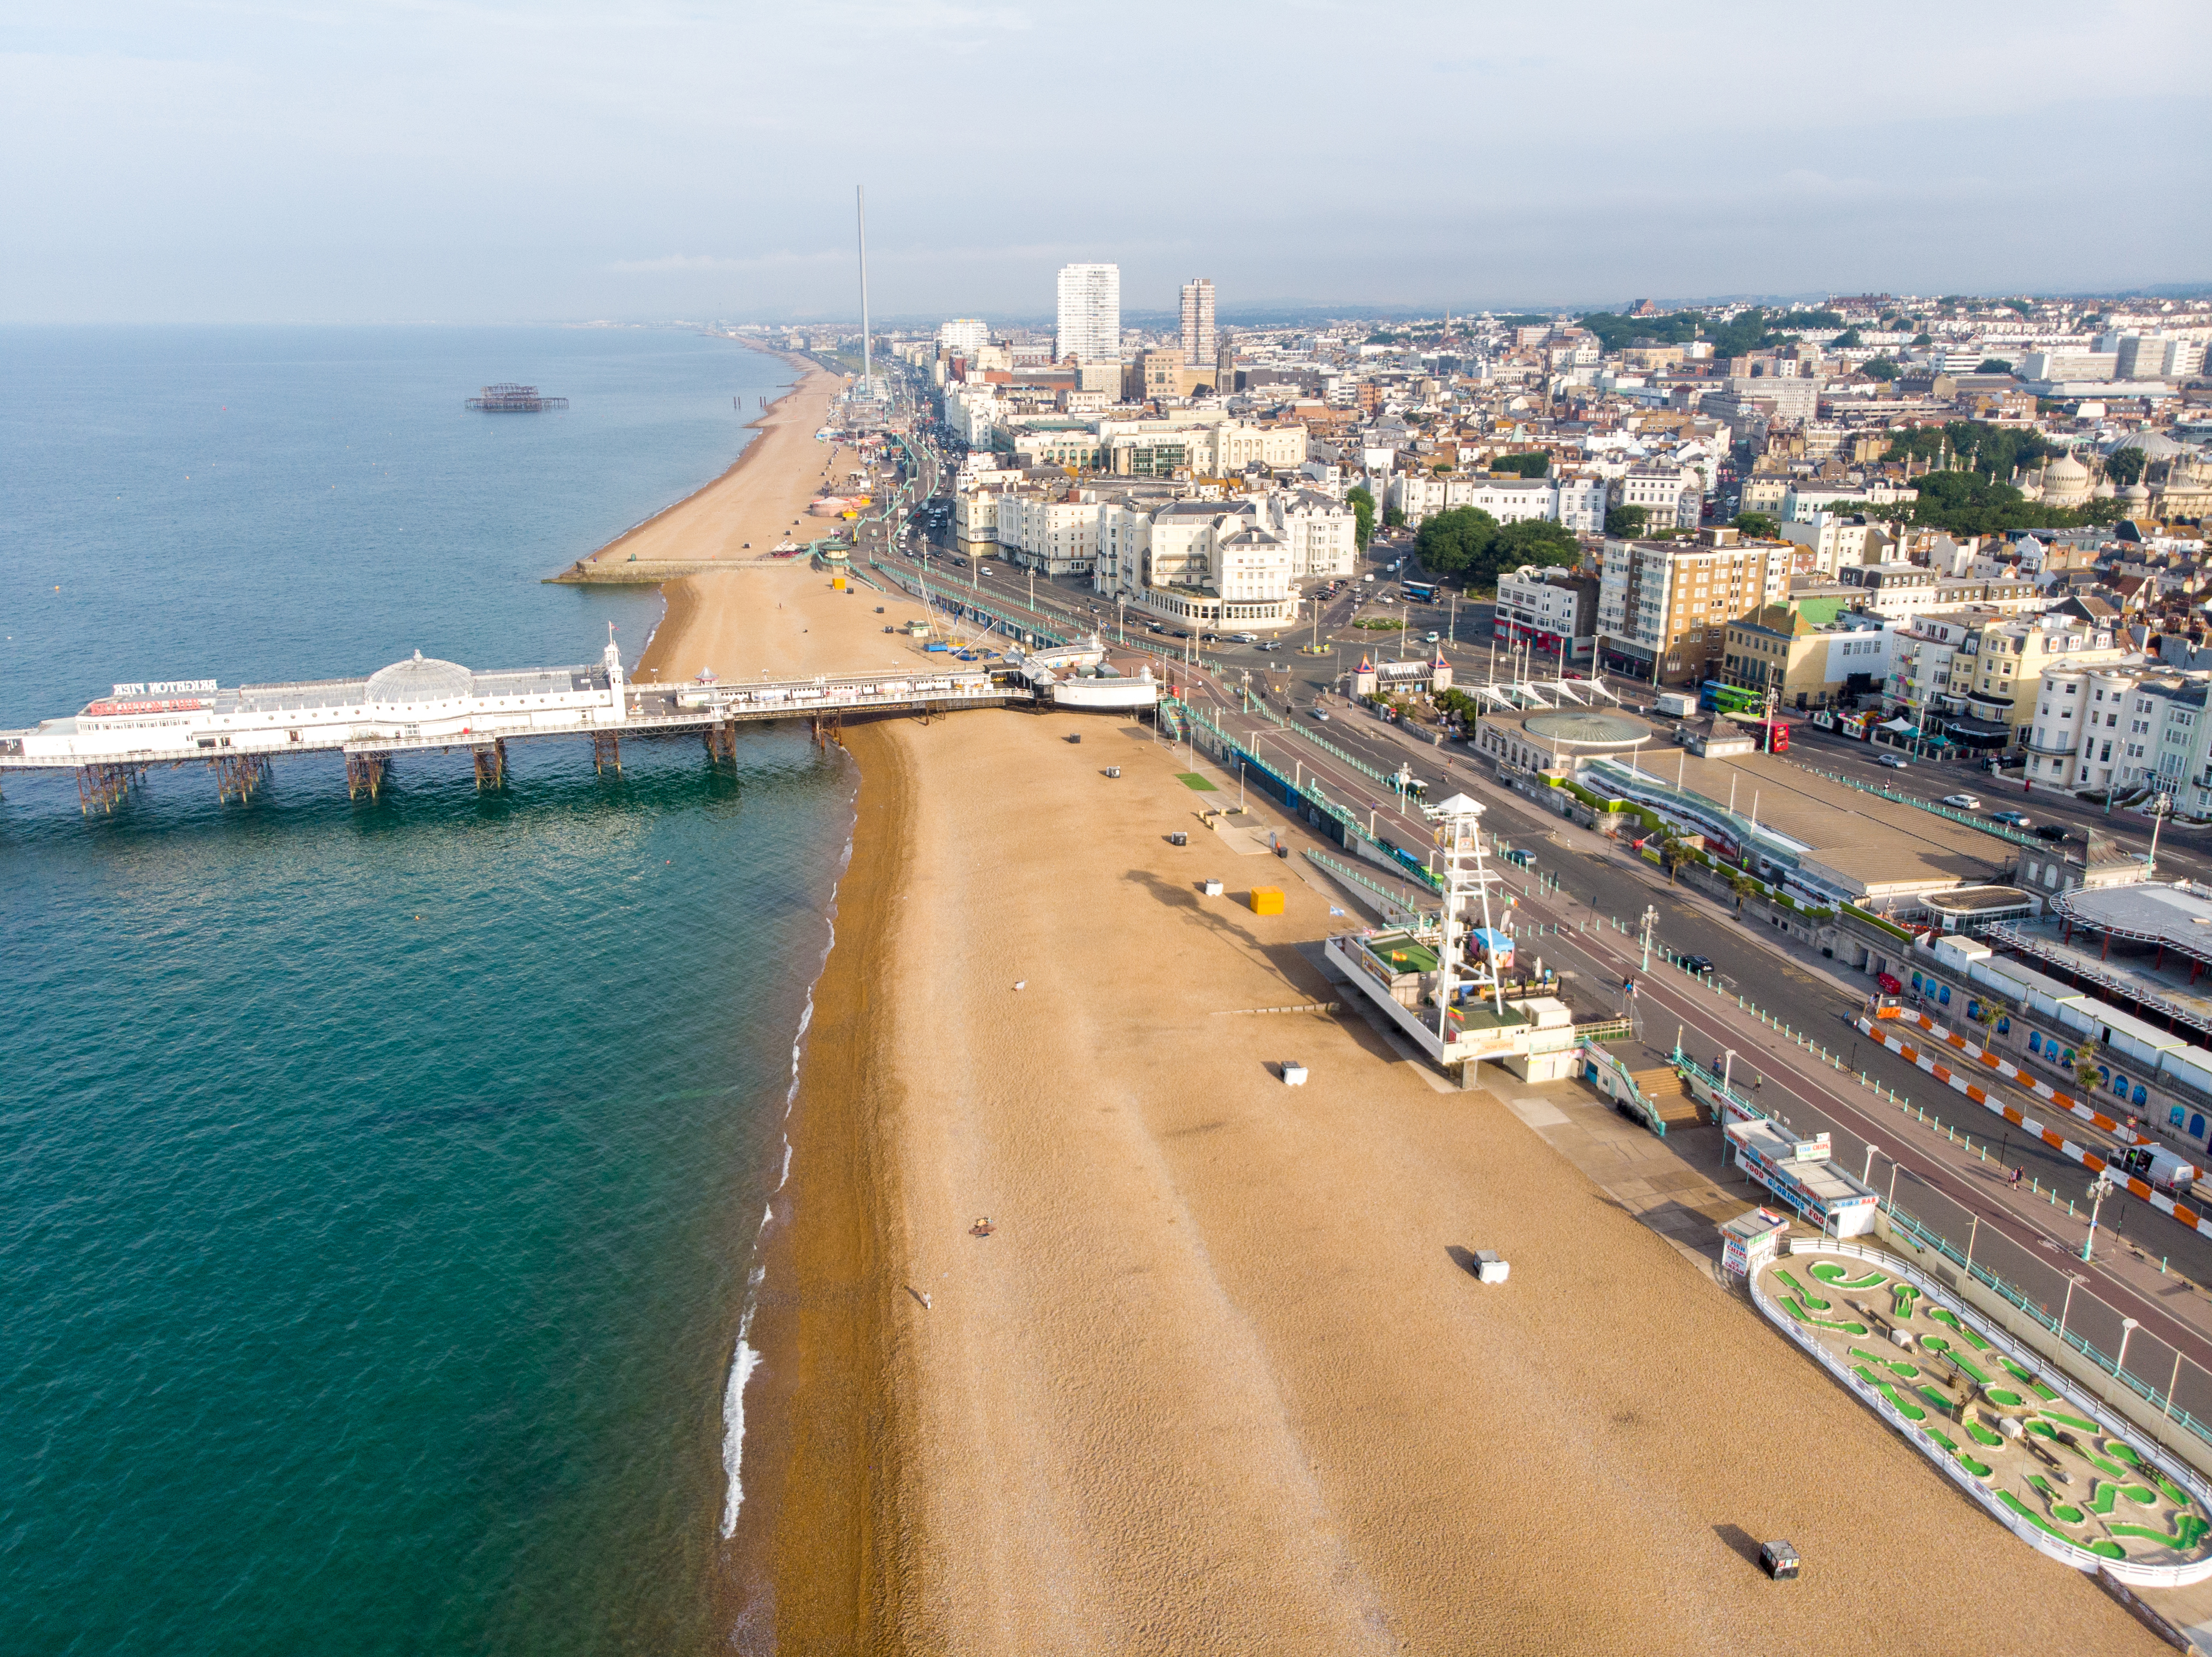 Brighton is a big attraction for tourists